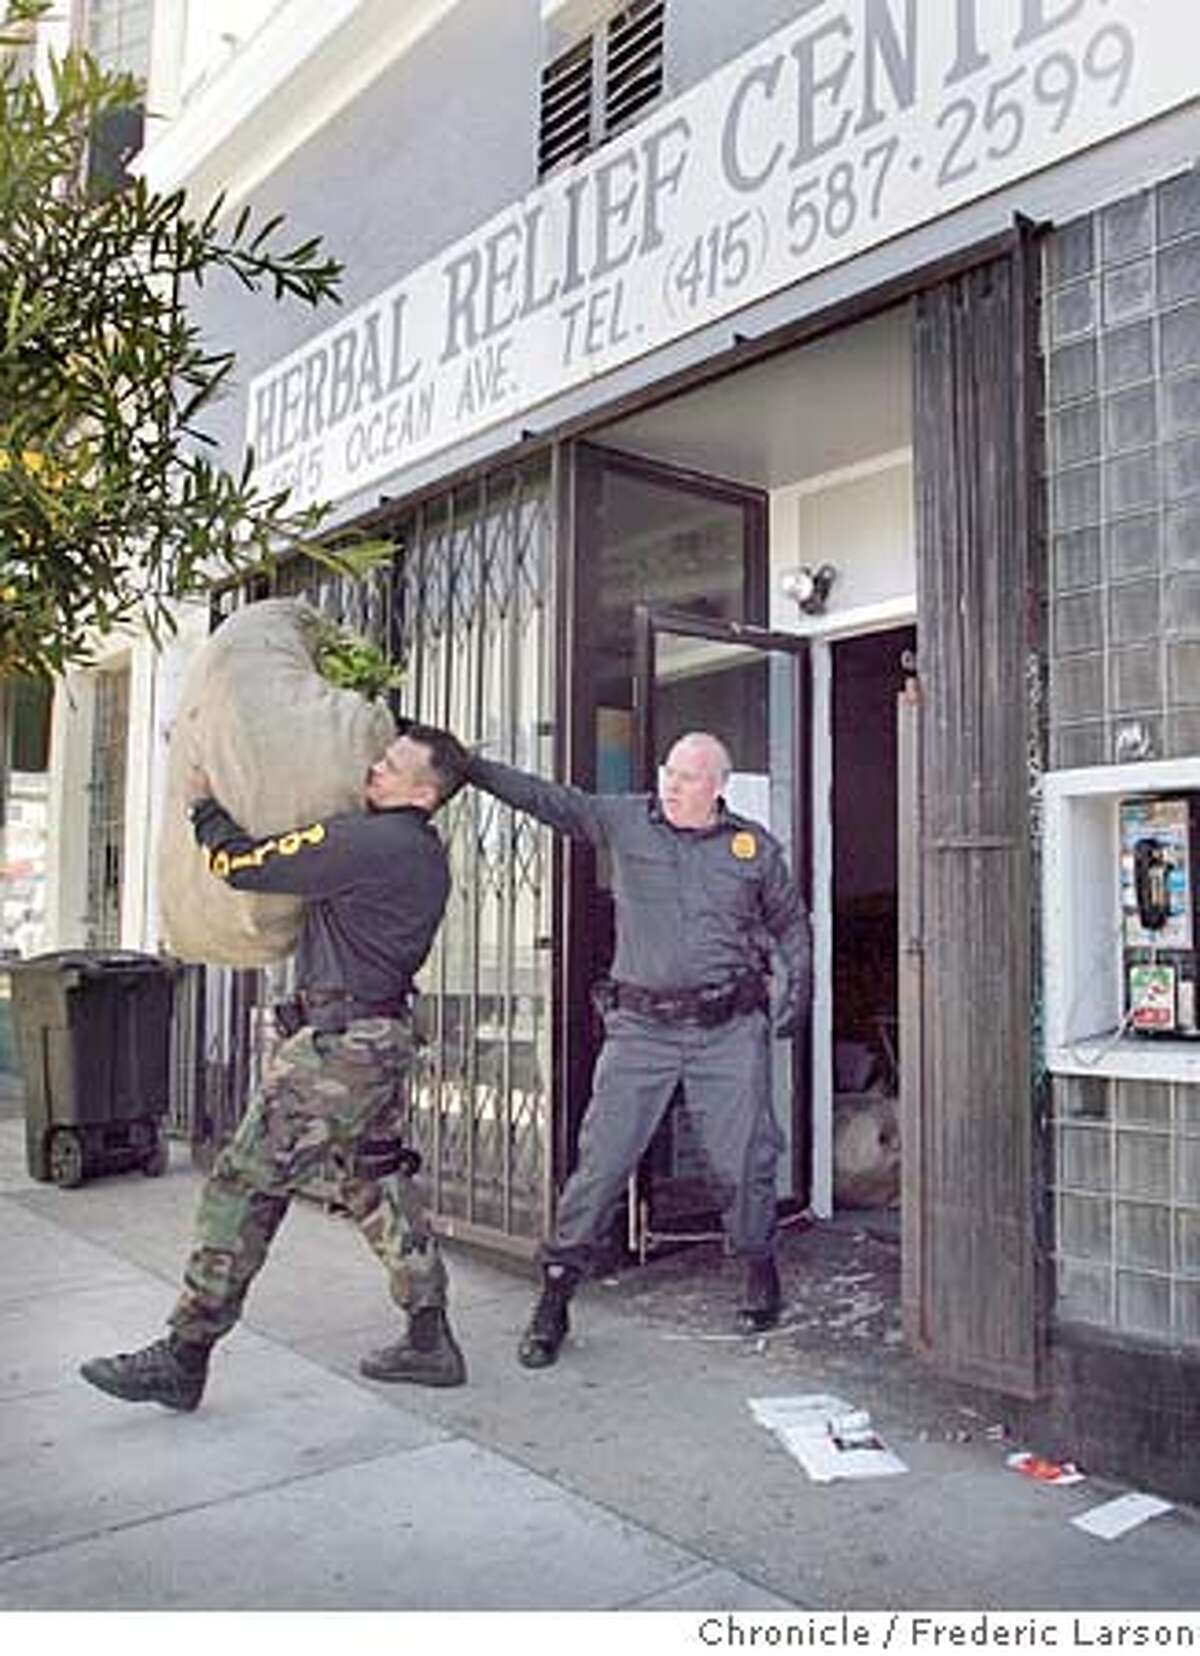 POT099_fl.jpg Federal agents raided 1545 Ocean Ave. SF today which was one of three San Francisco medical marijuana dispensaries as part of a broader investigation into money laundering and Asian organized crime, authorities said. The operation targeted two cannabis clubs on Ocean Avenue and another on Judah Street, and came just two weeks after the U.S. Supreme Court � in a crushing blow to the medical marijuana movement � ruled that the federal government had the authority to prosecute people whose actions are legal under state law. Law enforcement sources said the clubs were not targeted for drug operations but say they were allegedly being used as fronts for money-laundering operations. Federal agents, in some cases joined by San Francisco police, raided 20 homes and businesses in the city today as part of the operation, sources told The Chronicle. 6/23/05 San Francisco CA Frederic Larson The San Francisco Chronicle